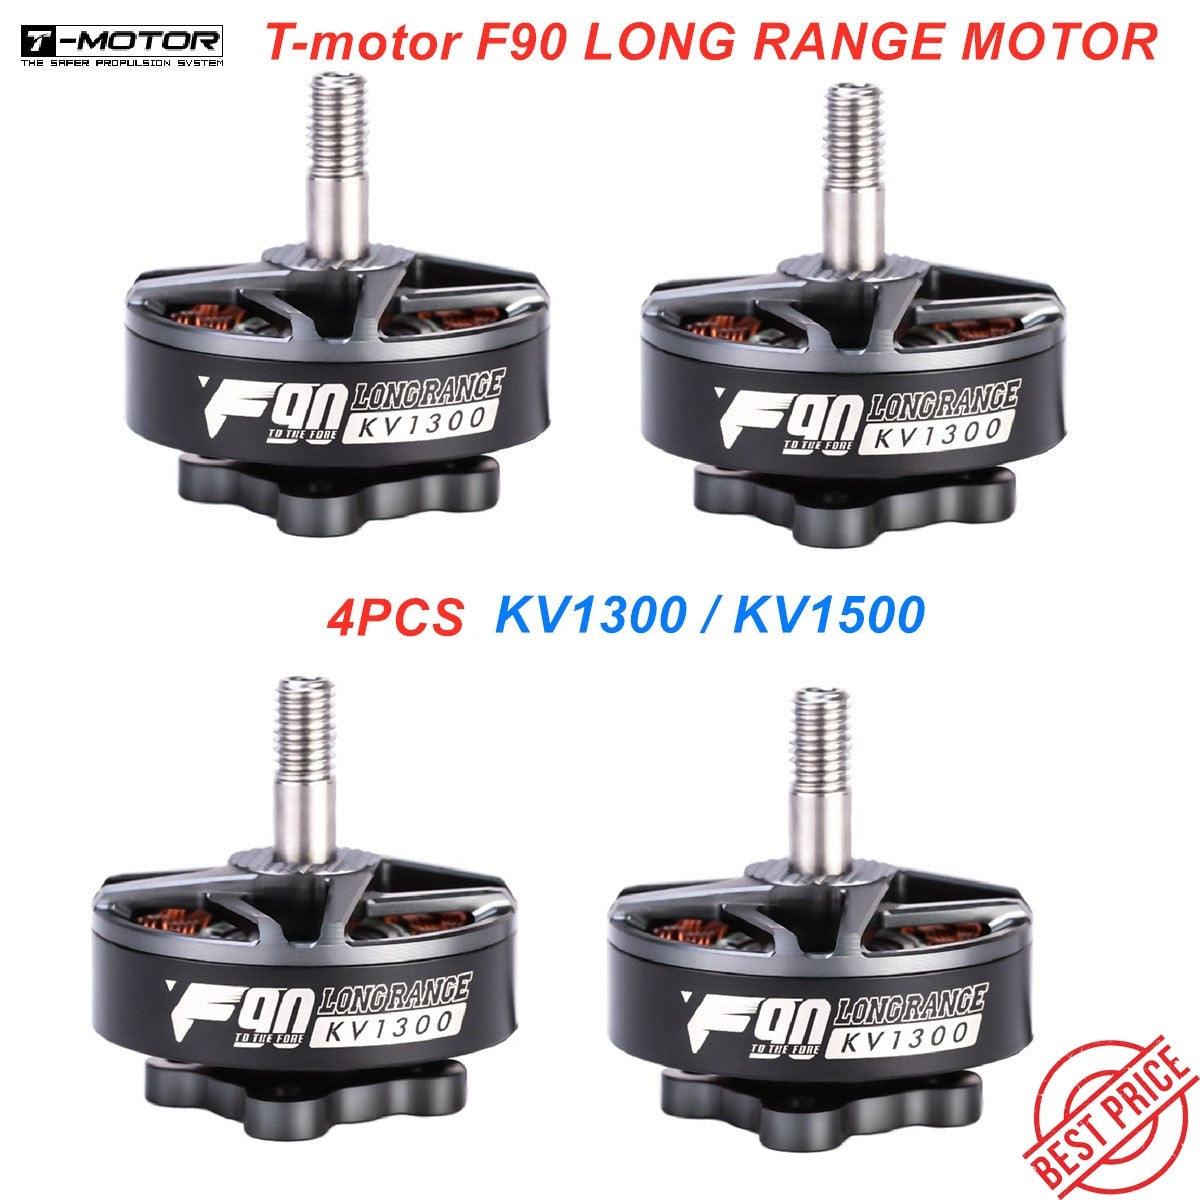 What is the stator size of the T-Motor F60 Pro V motors?